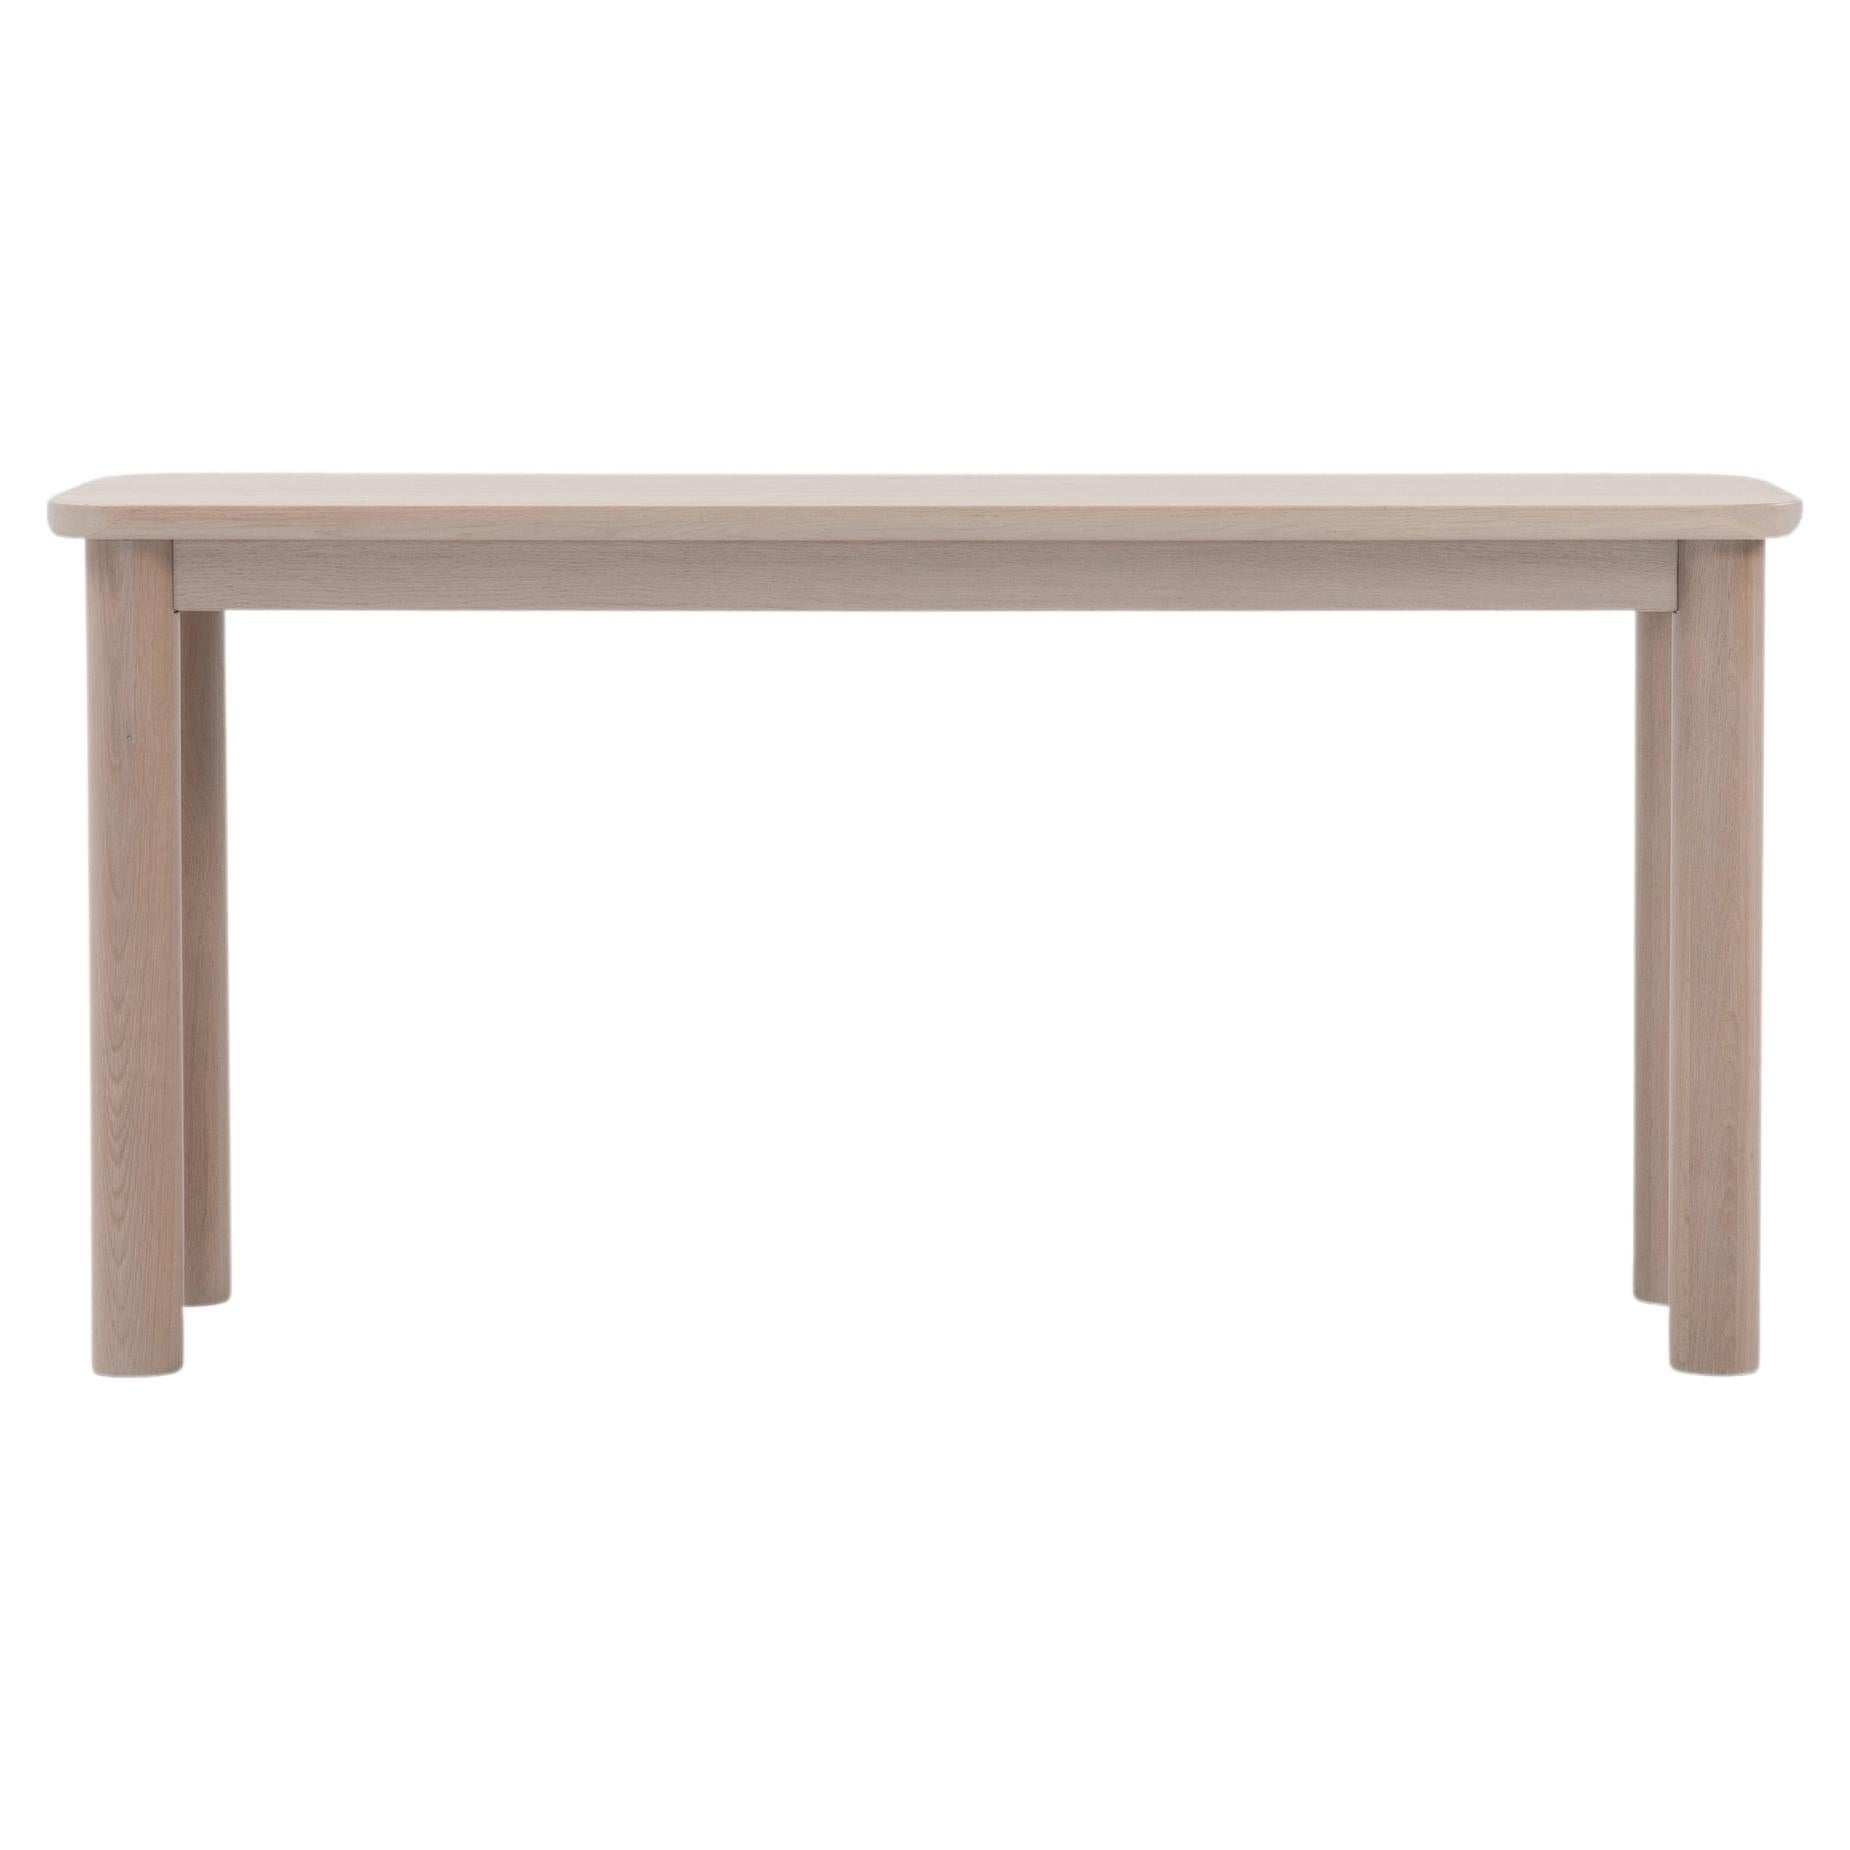 Arc Console Table, Minimalist Nude Console Table in Wood